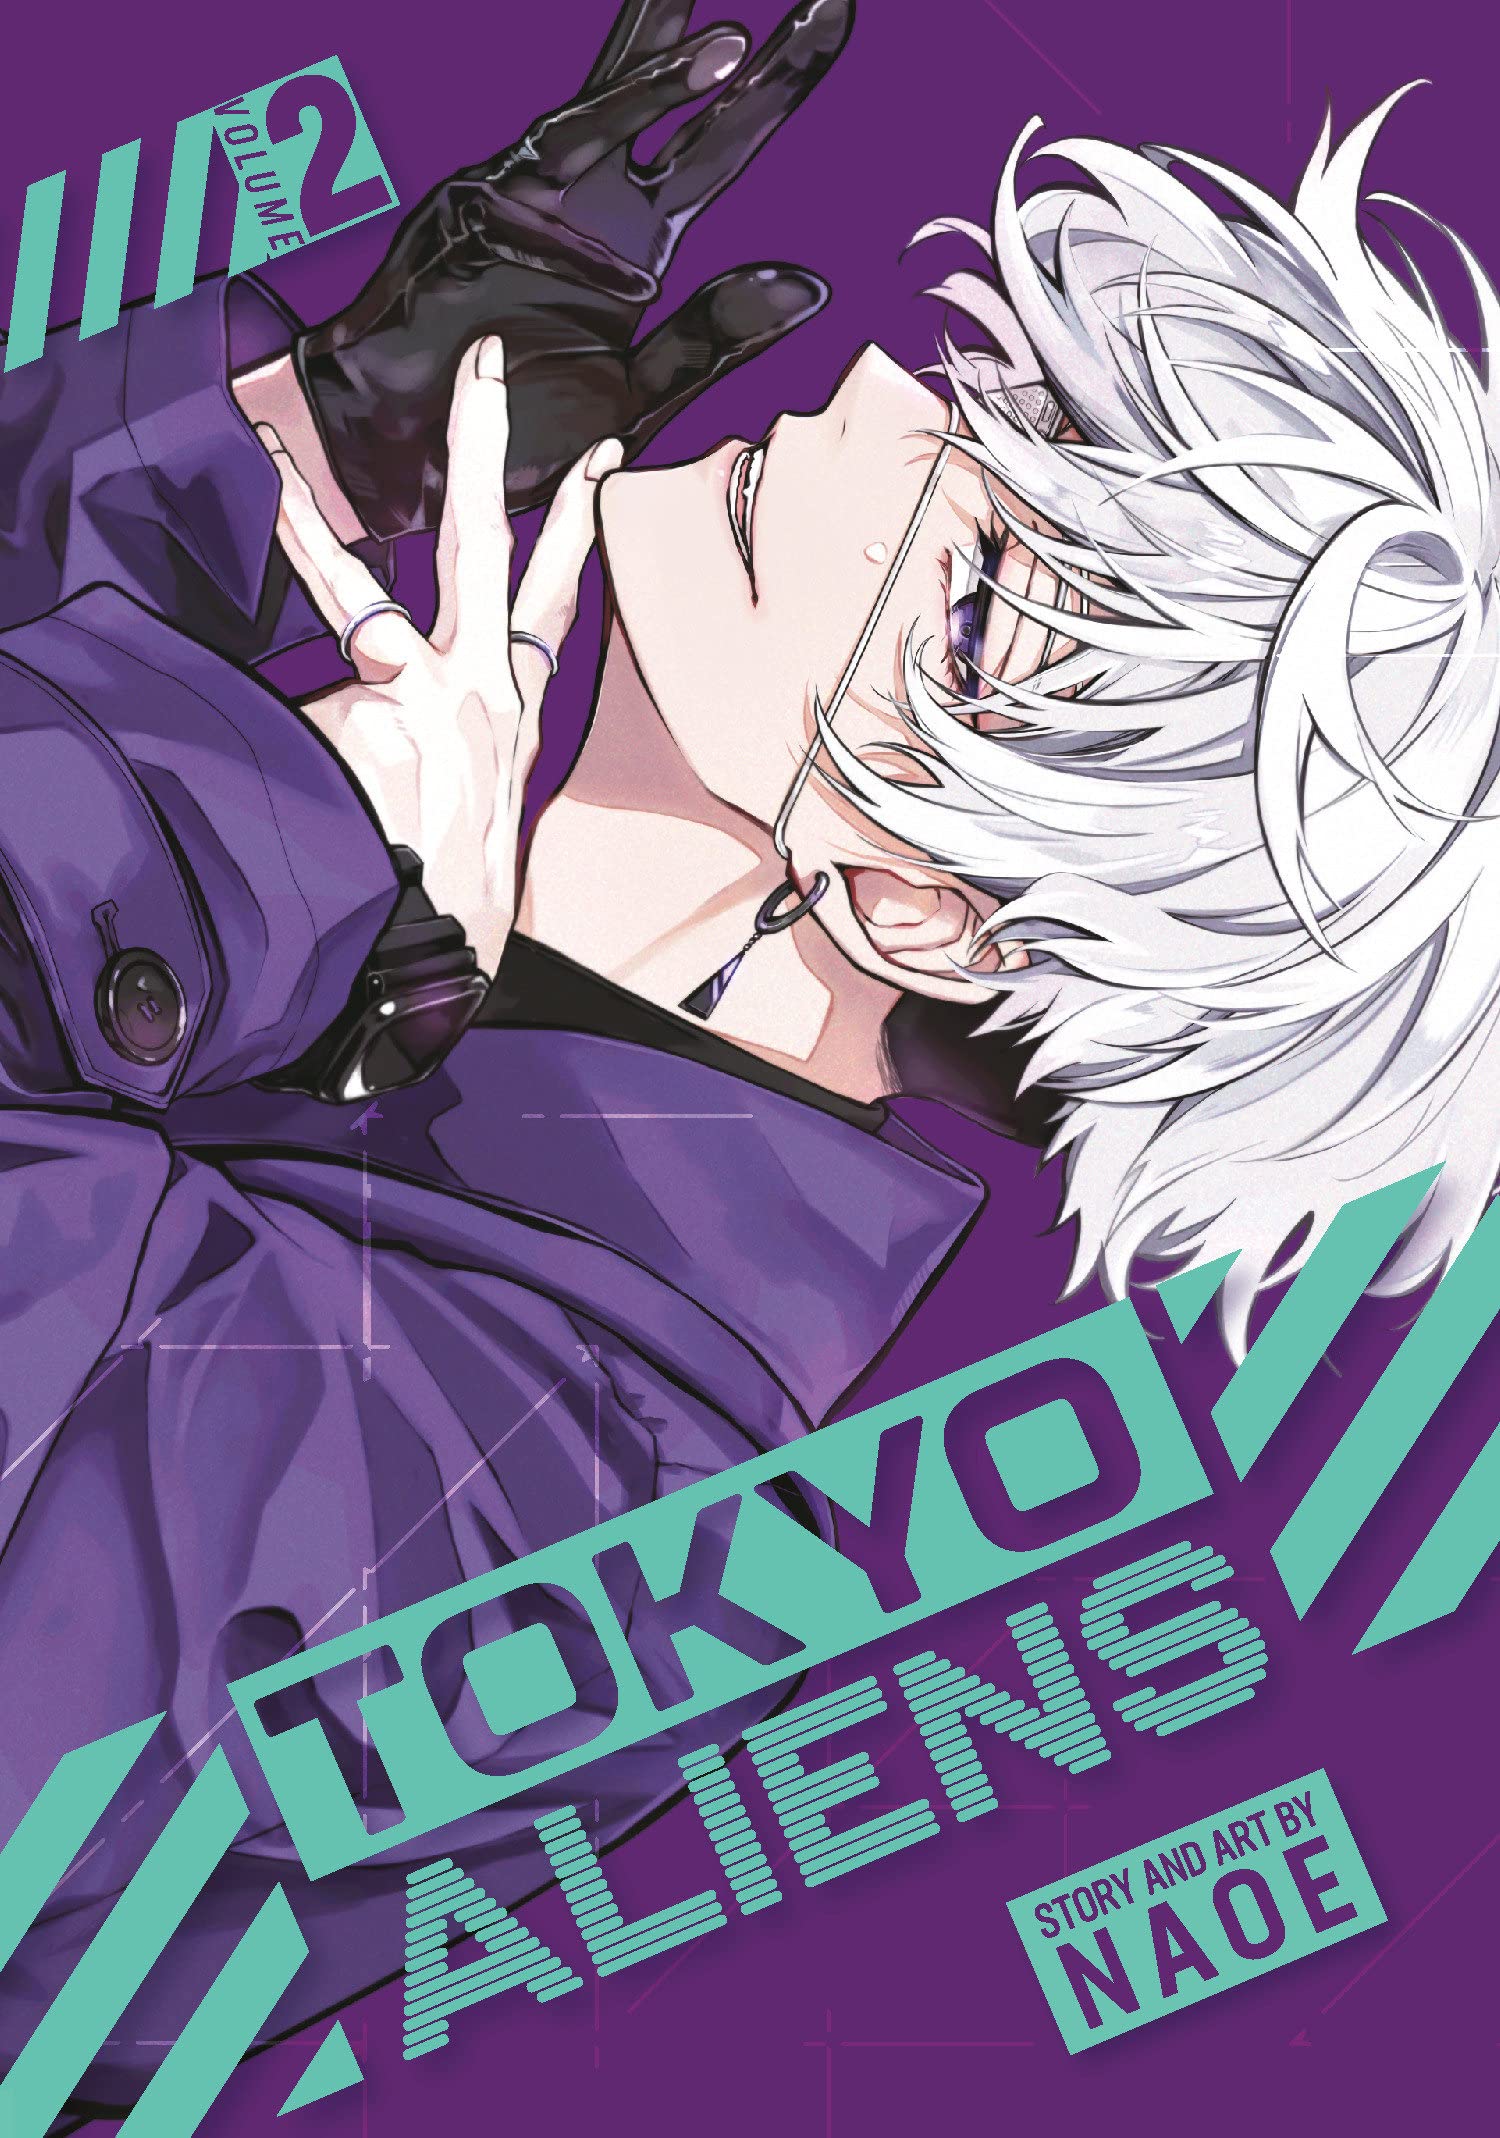 Tokyo Revengers Manga Releases Final Volume, Gets Author's Comment